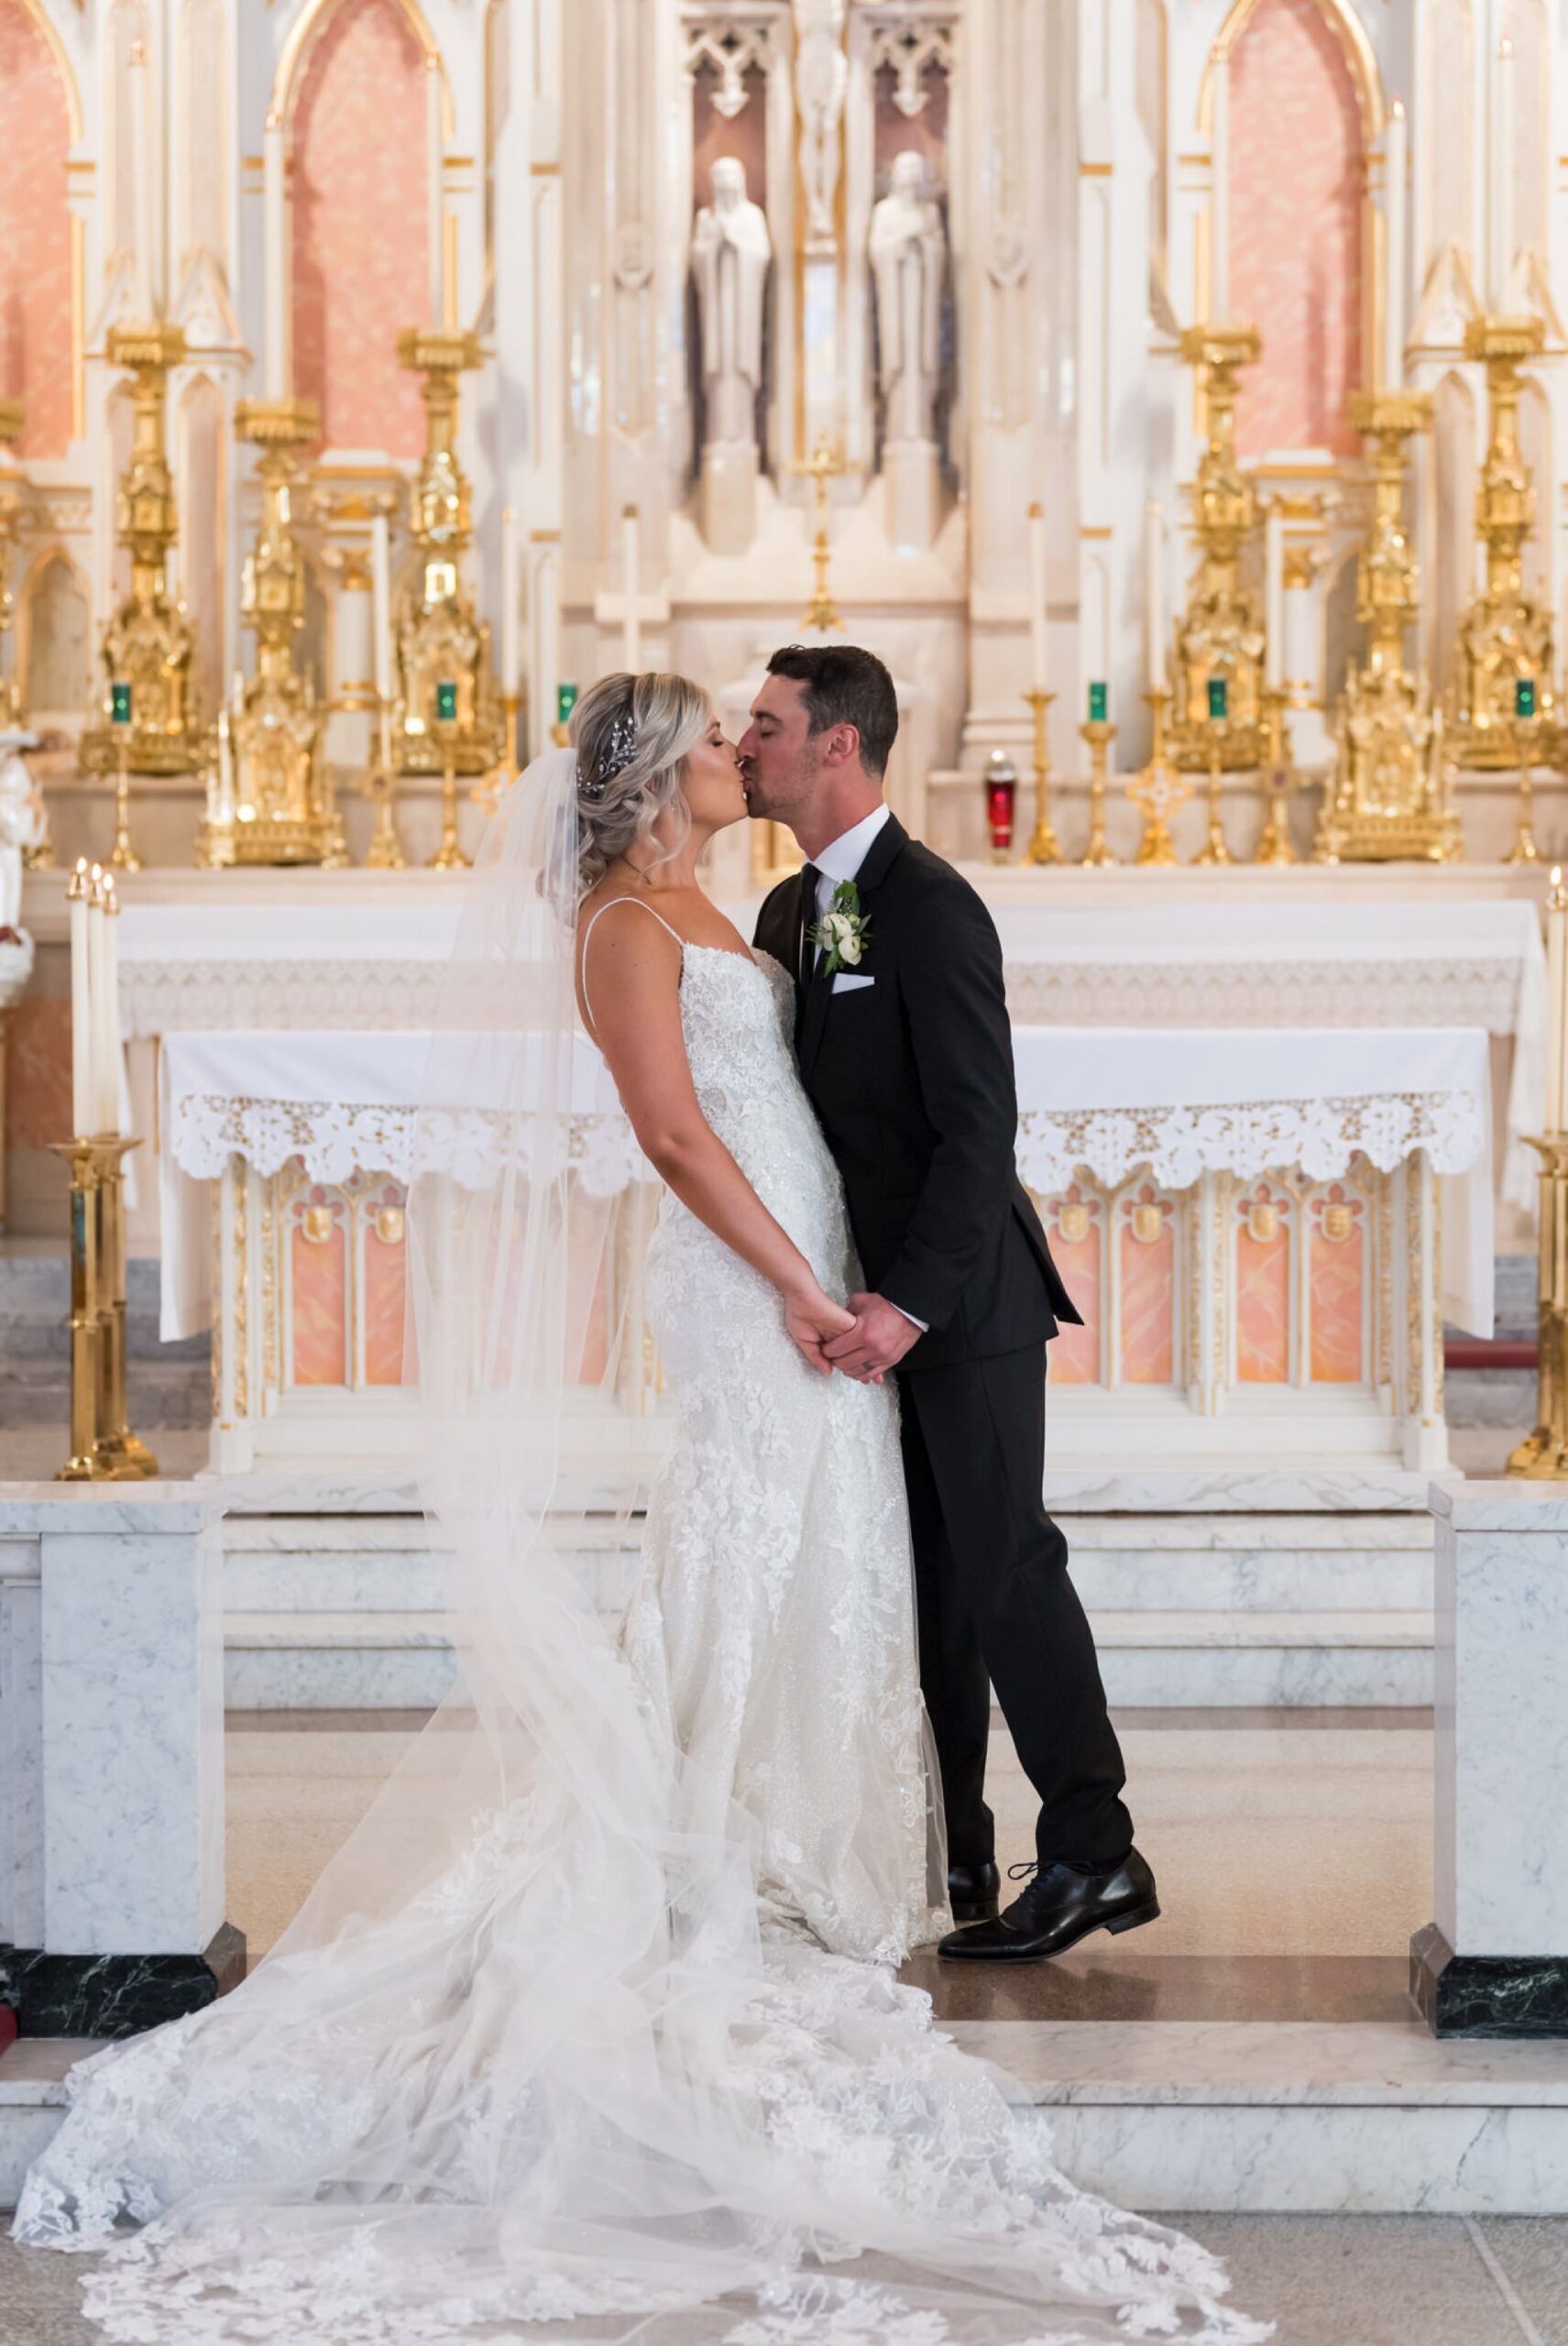 A bride and groom kiss at the altar of Detroit's Sweetest Heart of Mary Catholic Church on their wedding day.  